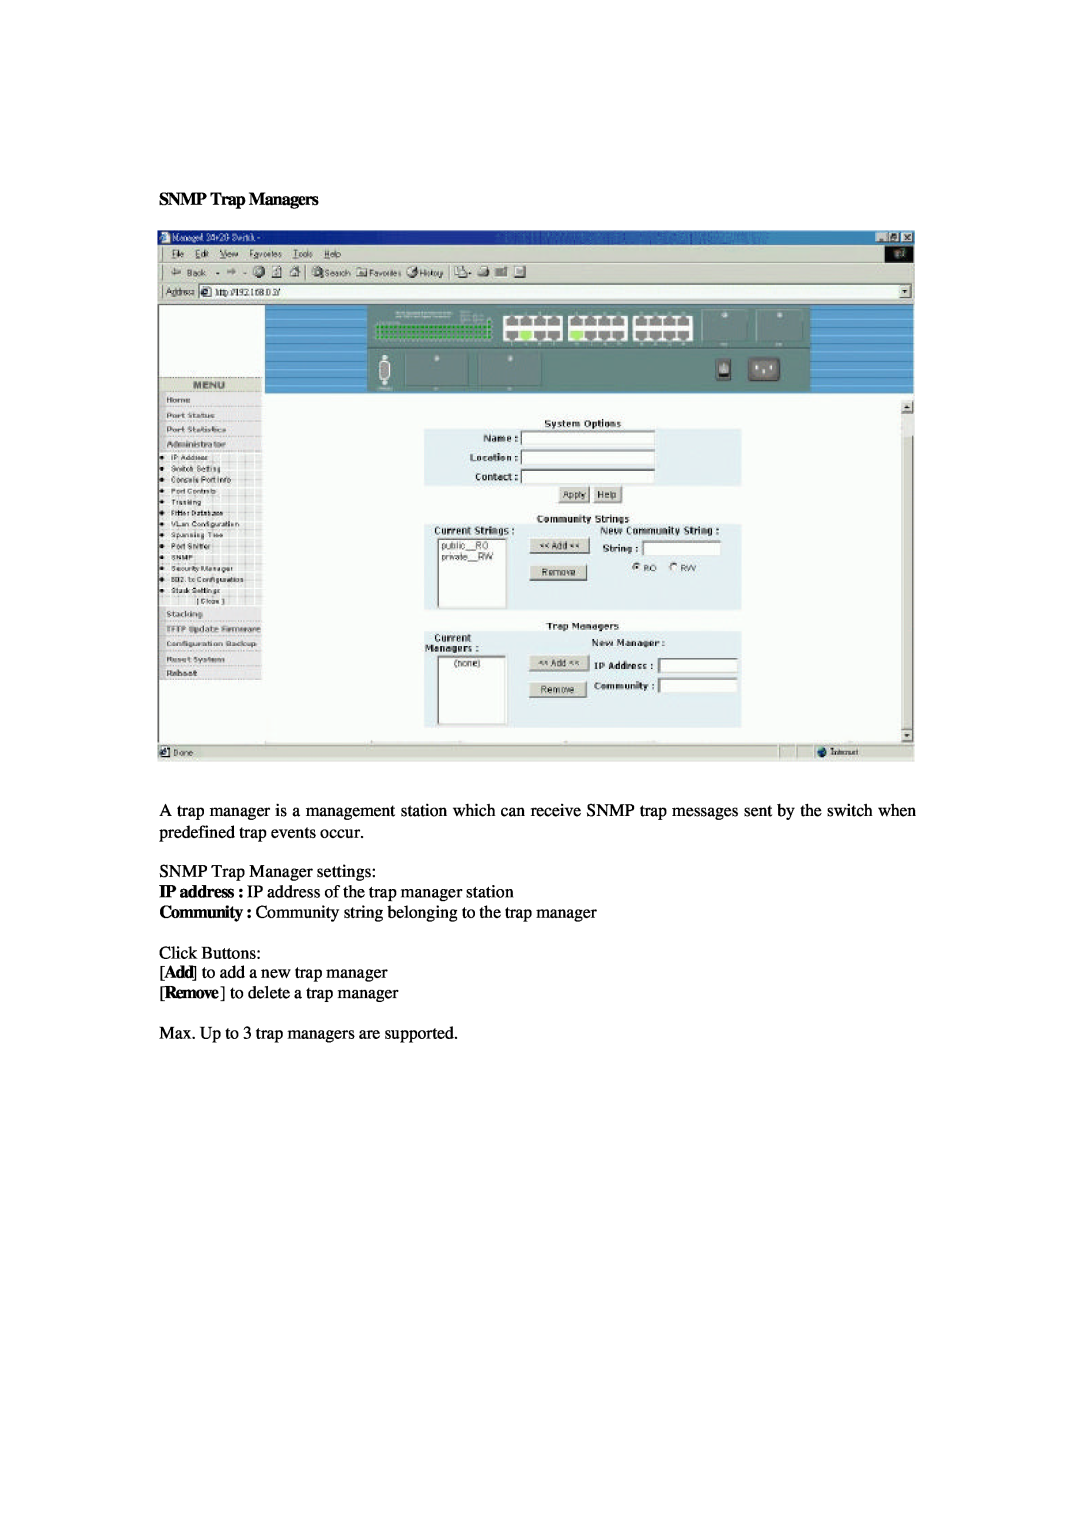 Xerox NS-2260 operation manual SNMP Trap Managers 